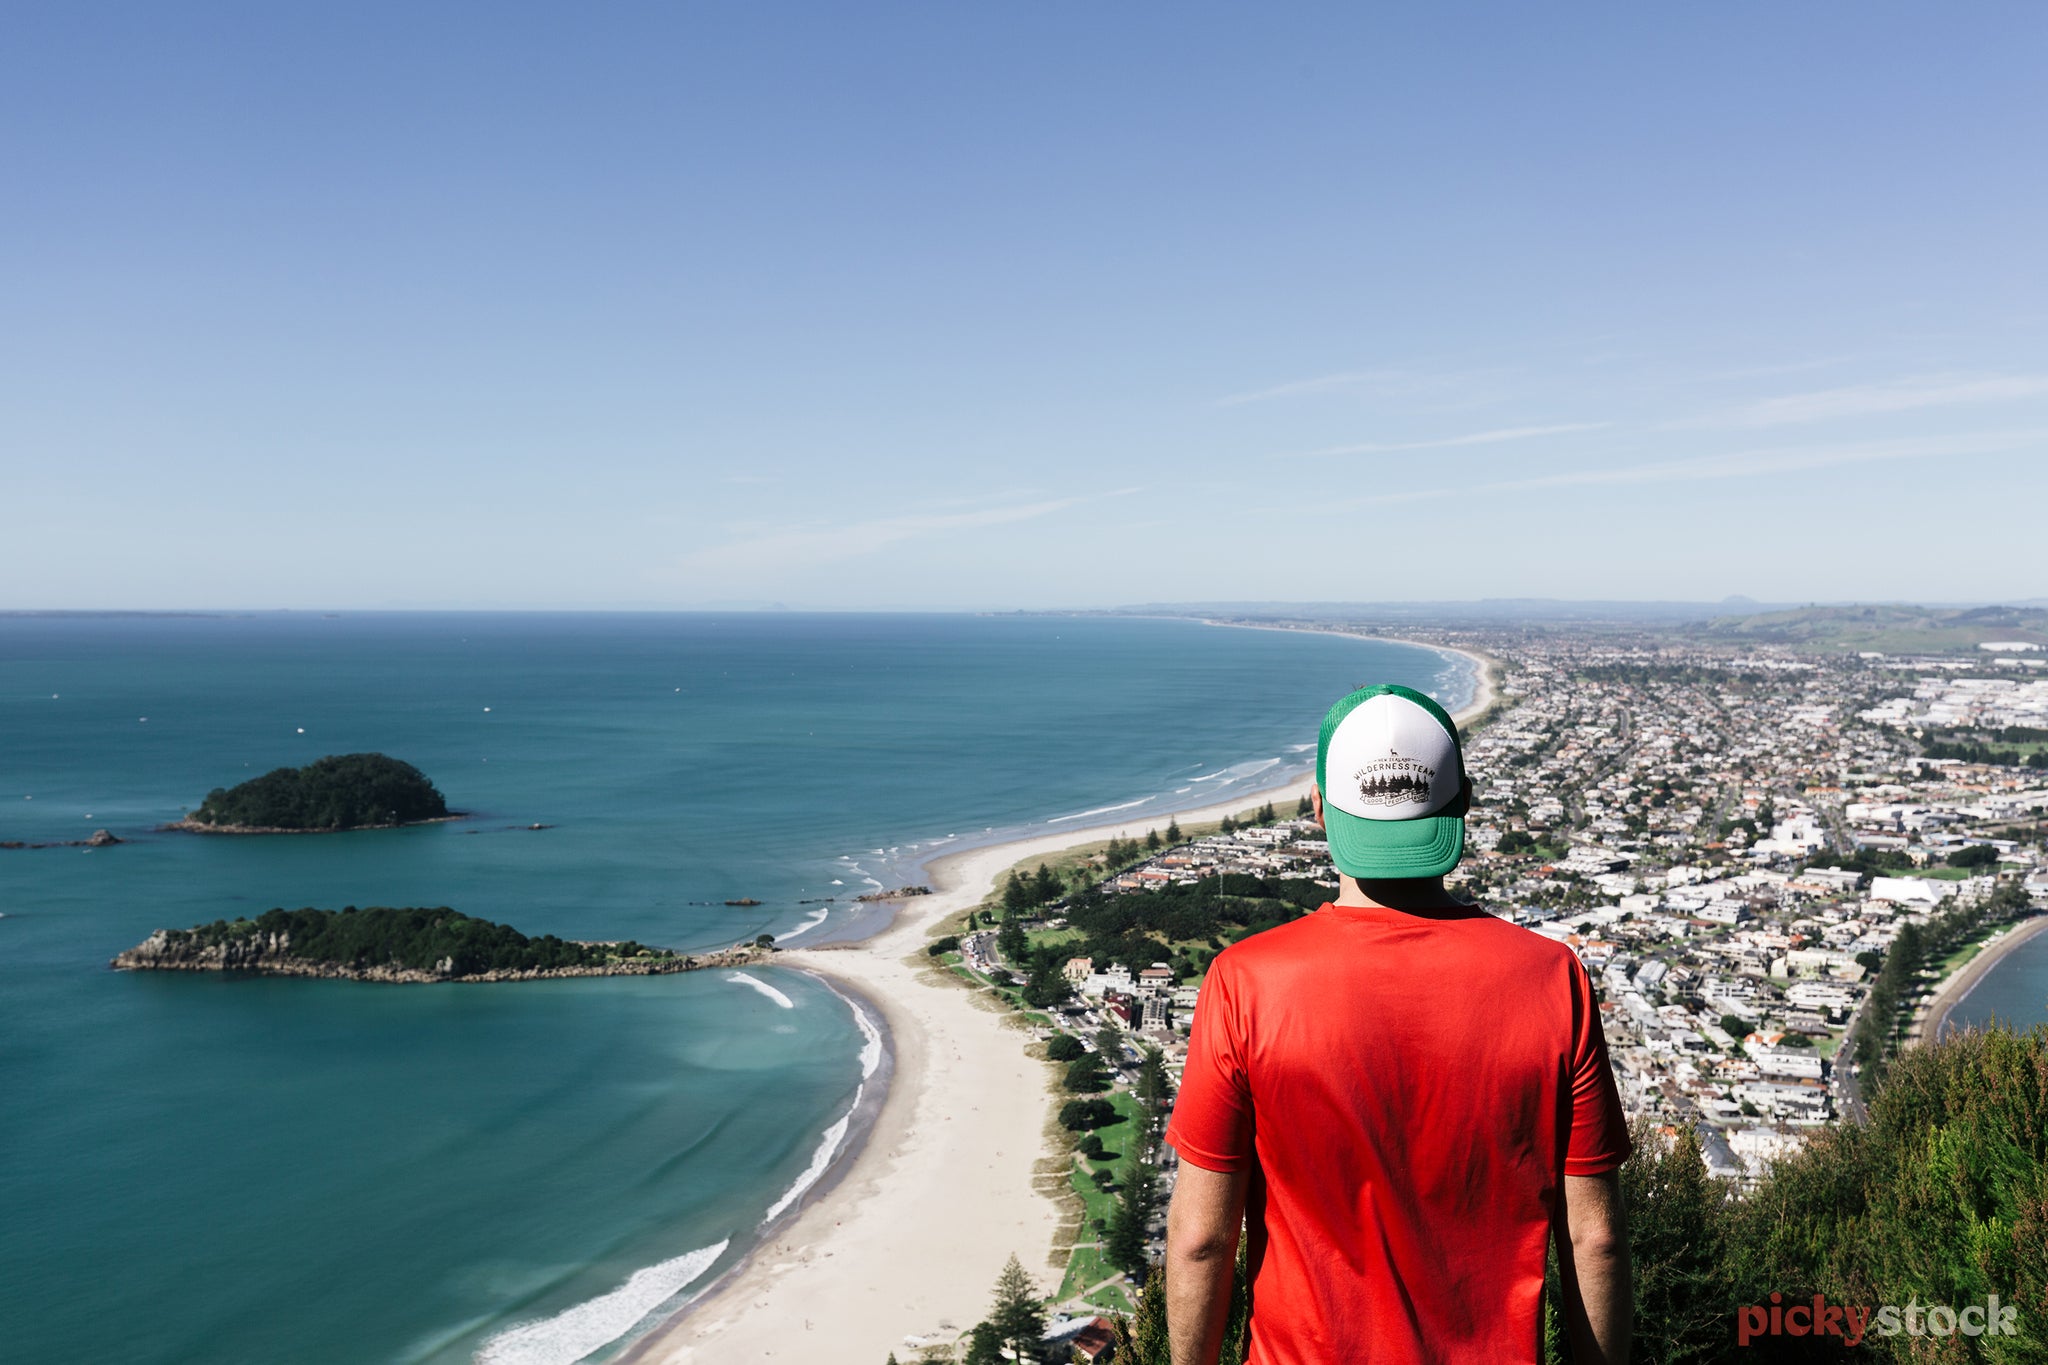 Man in red shirt with green and white hat looks out from the top of Mount Maunganui, down to the beach bellow on a bright blue day.